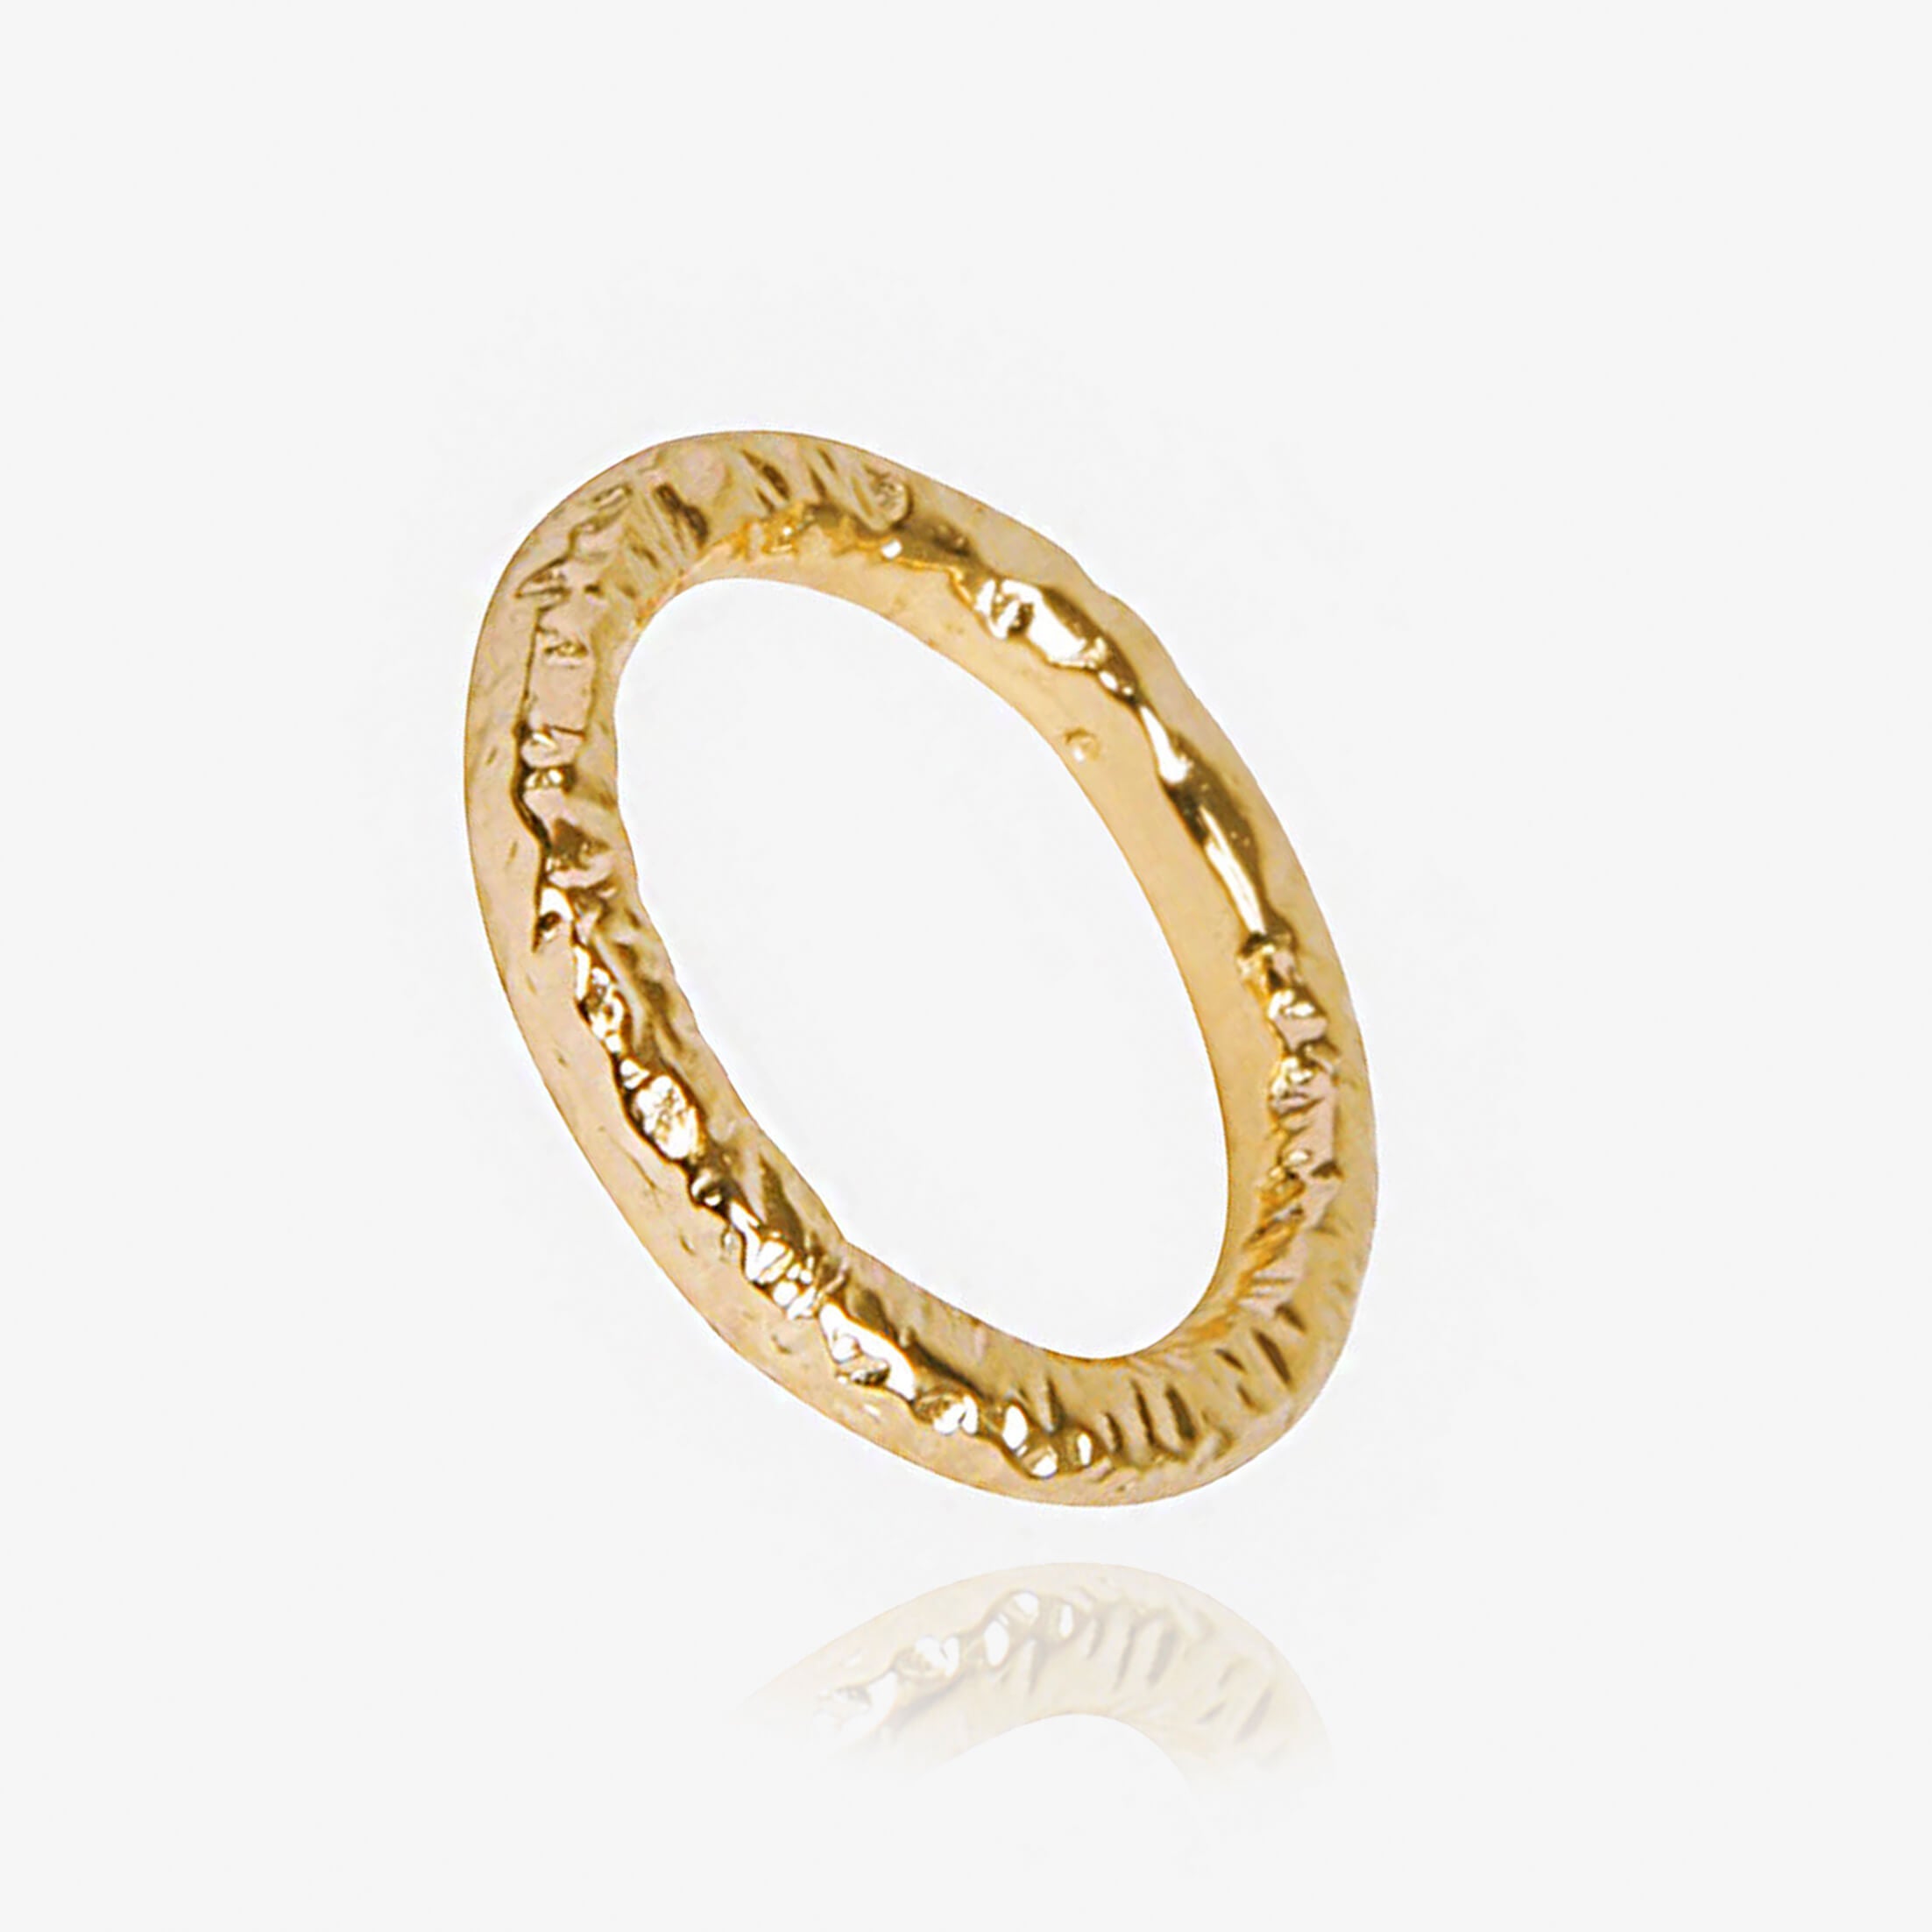 Thin ring with meteorite style texturing in gold